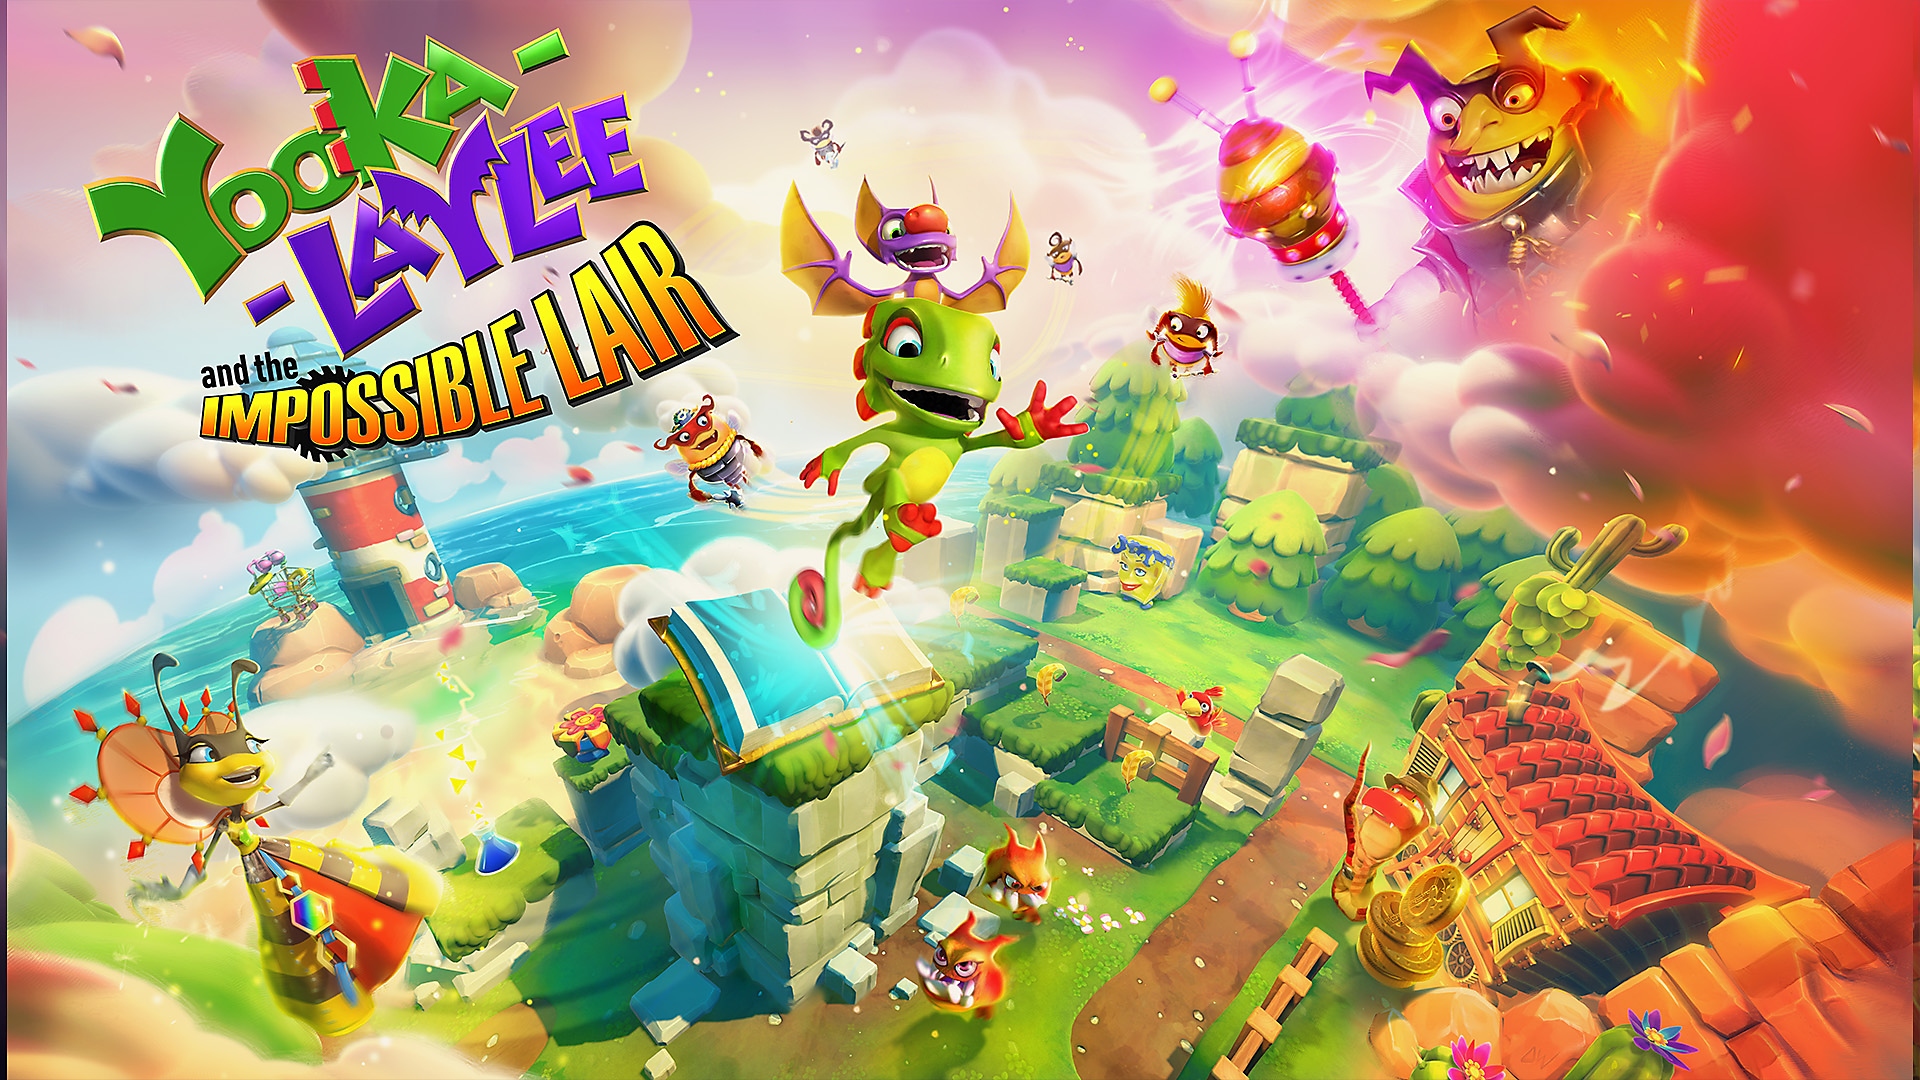 Trailer de Yooka-Laylee and the Impossible Lair